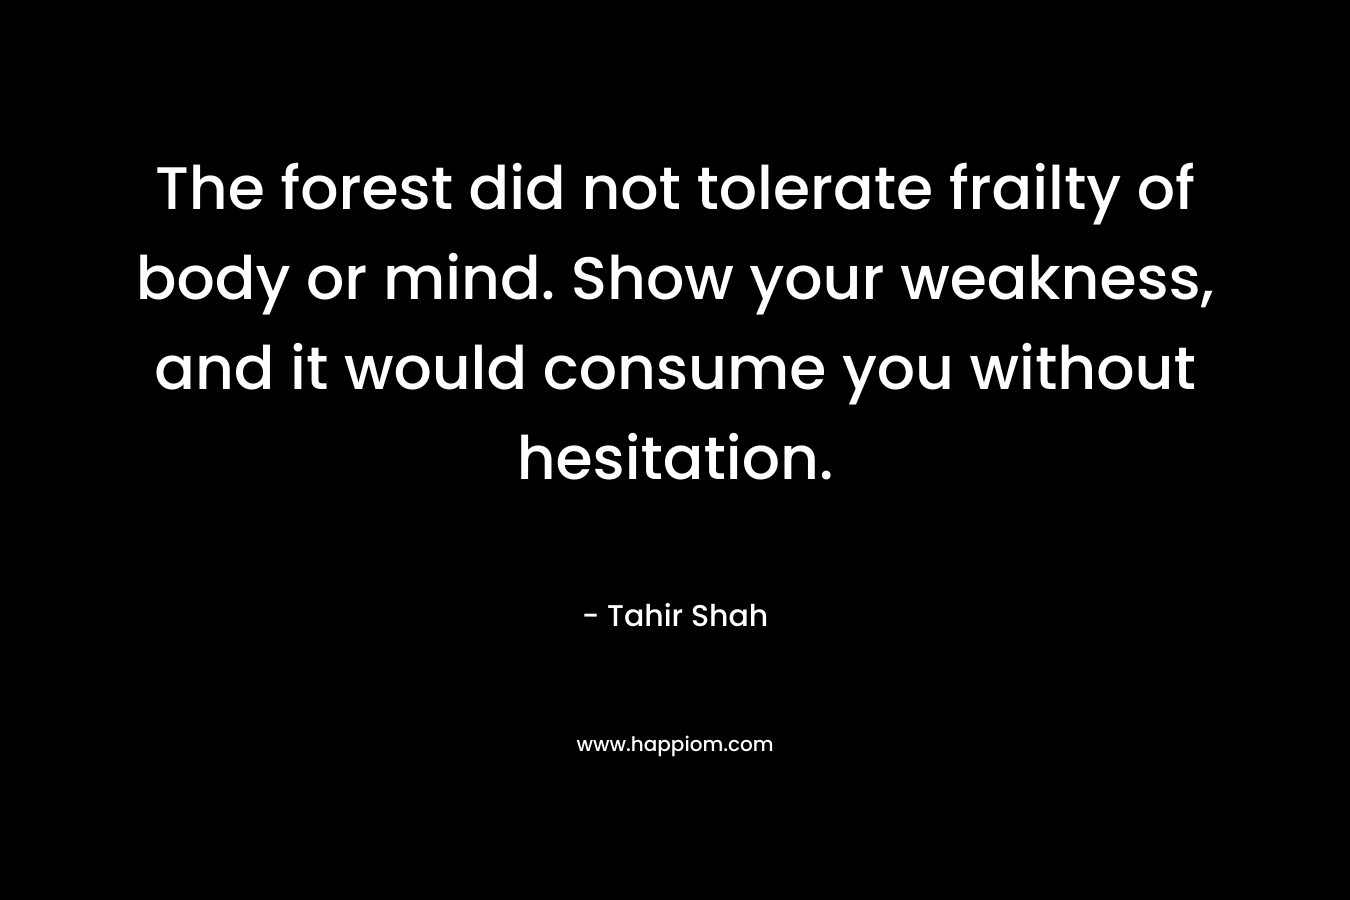 The forest did not tolerate frailty of body or mind. Show your weakness, and it would consume you without hesitation. – Tahir Shah